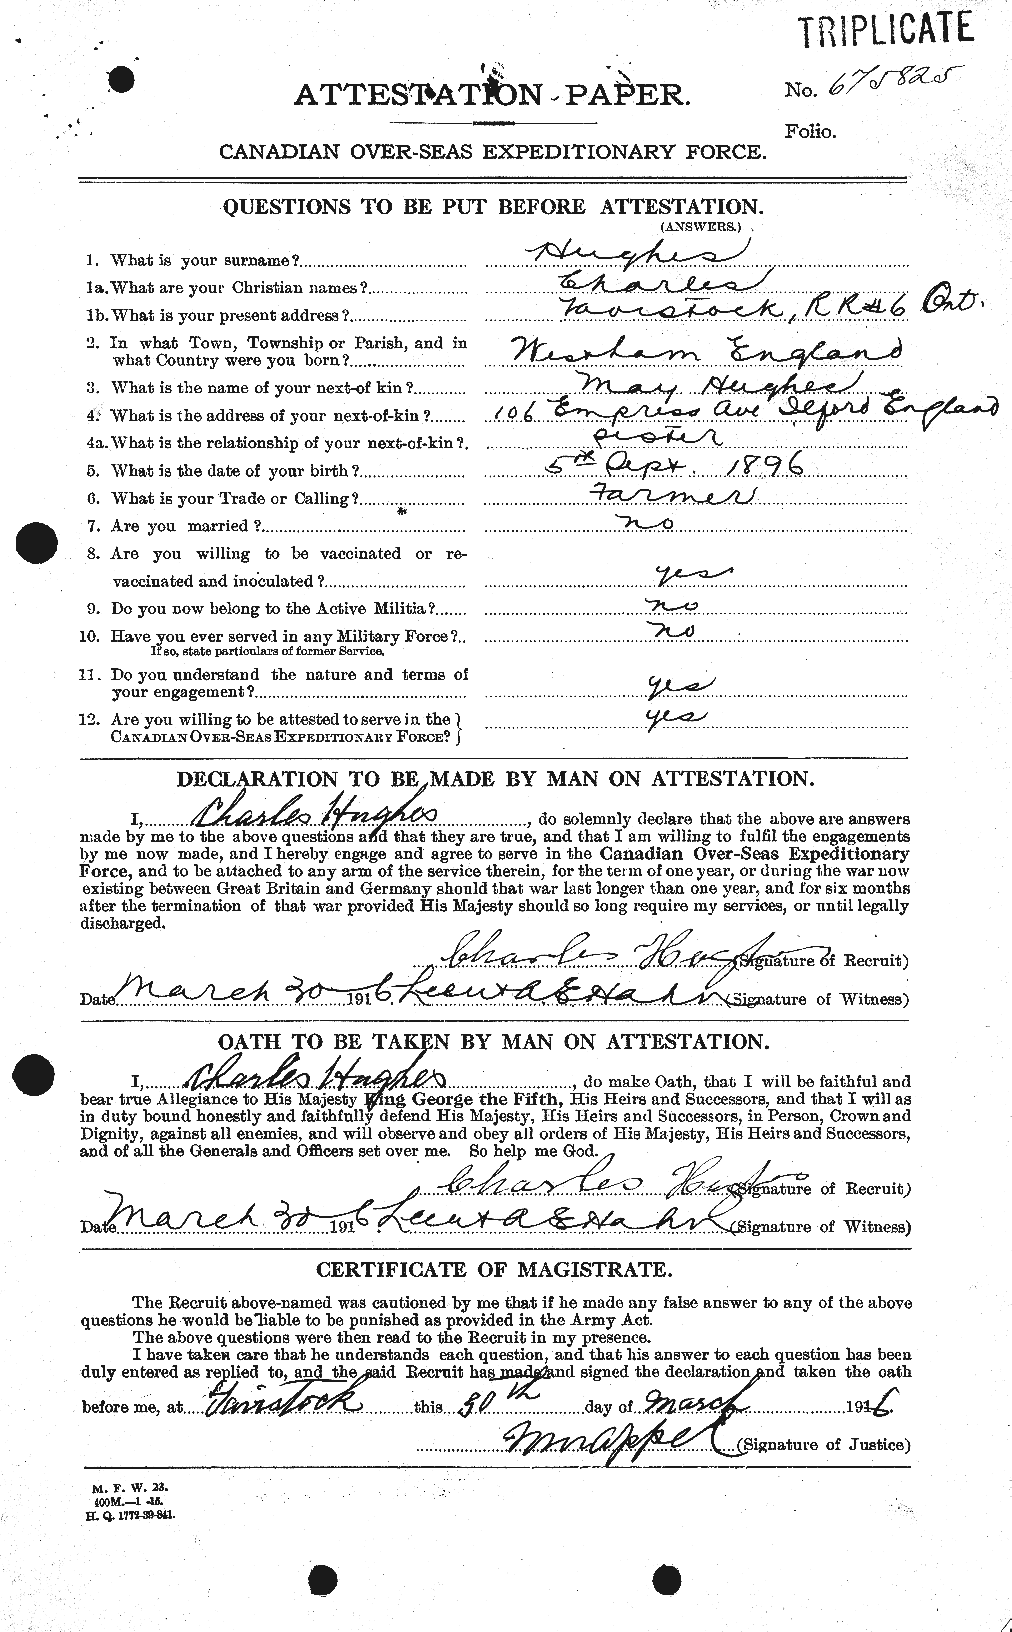 Personnel Records of the First World War - CEF 402599a